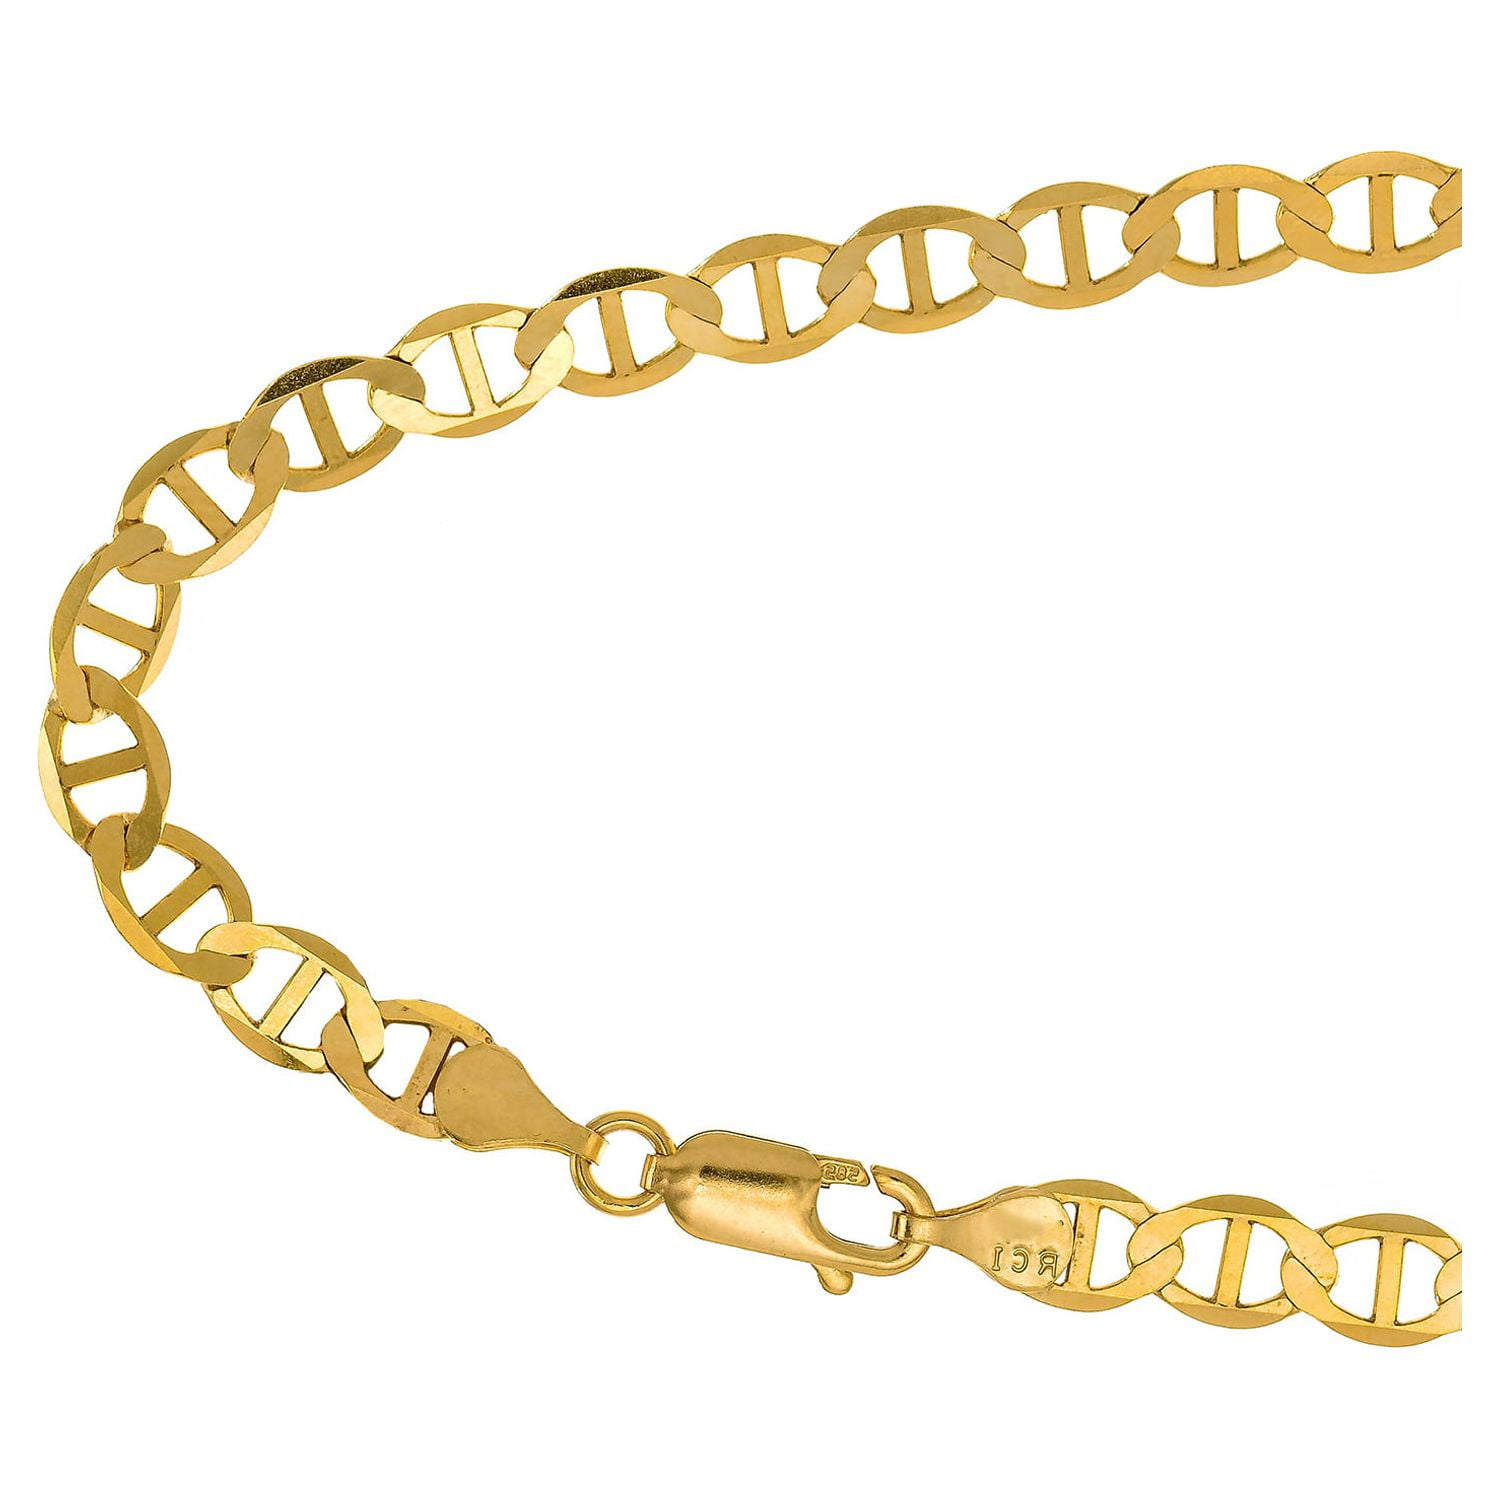 10k and 14k Solid Yellow Gold 1.2mm - 5.5mm Mariner Link Chain Necklace-  16 18 2022 24 30 